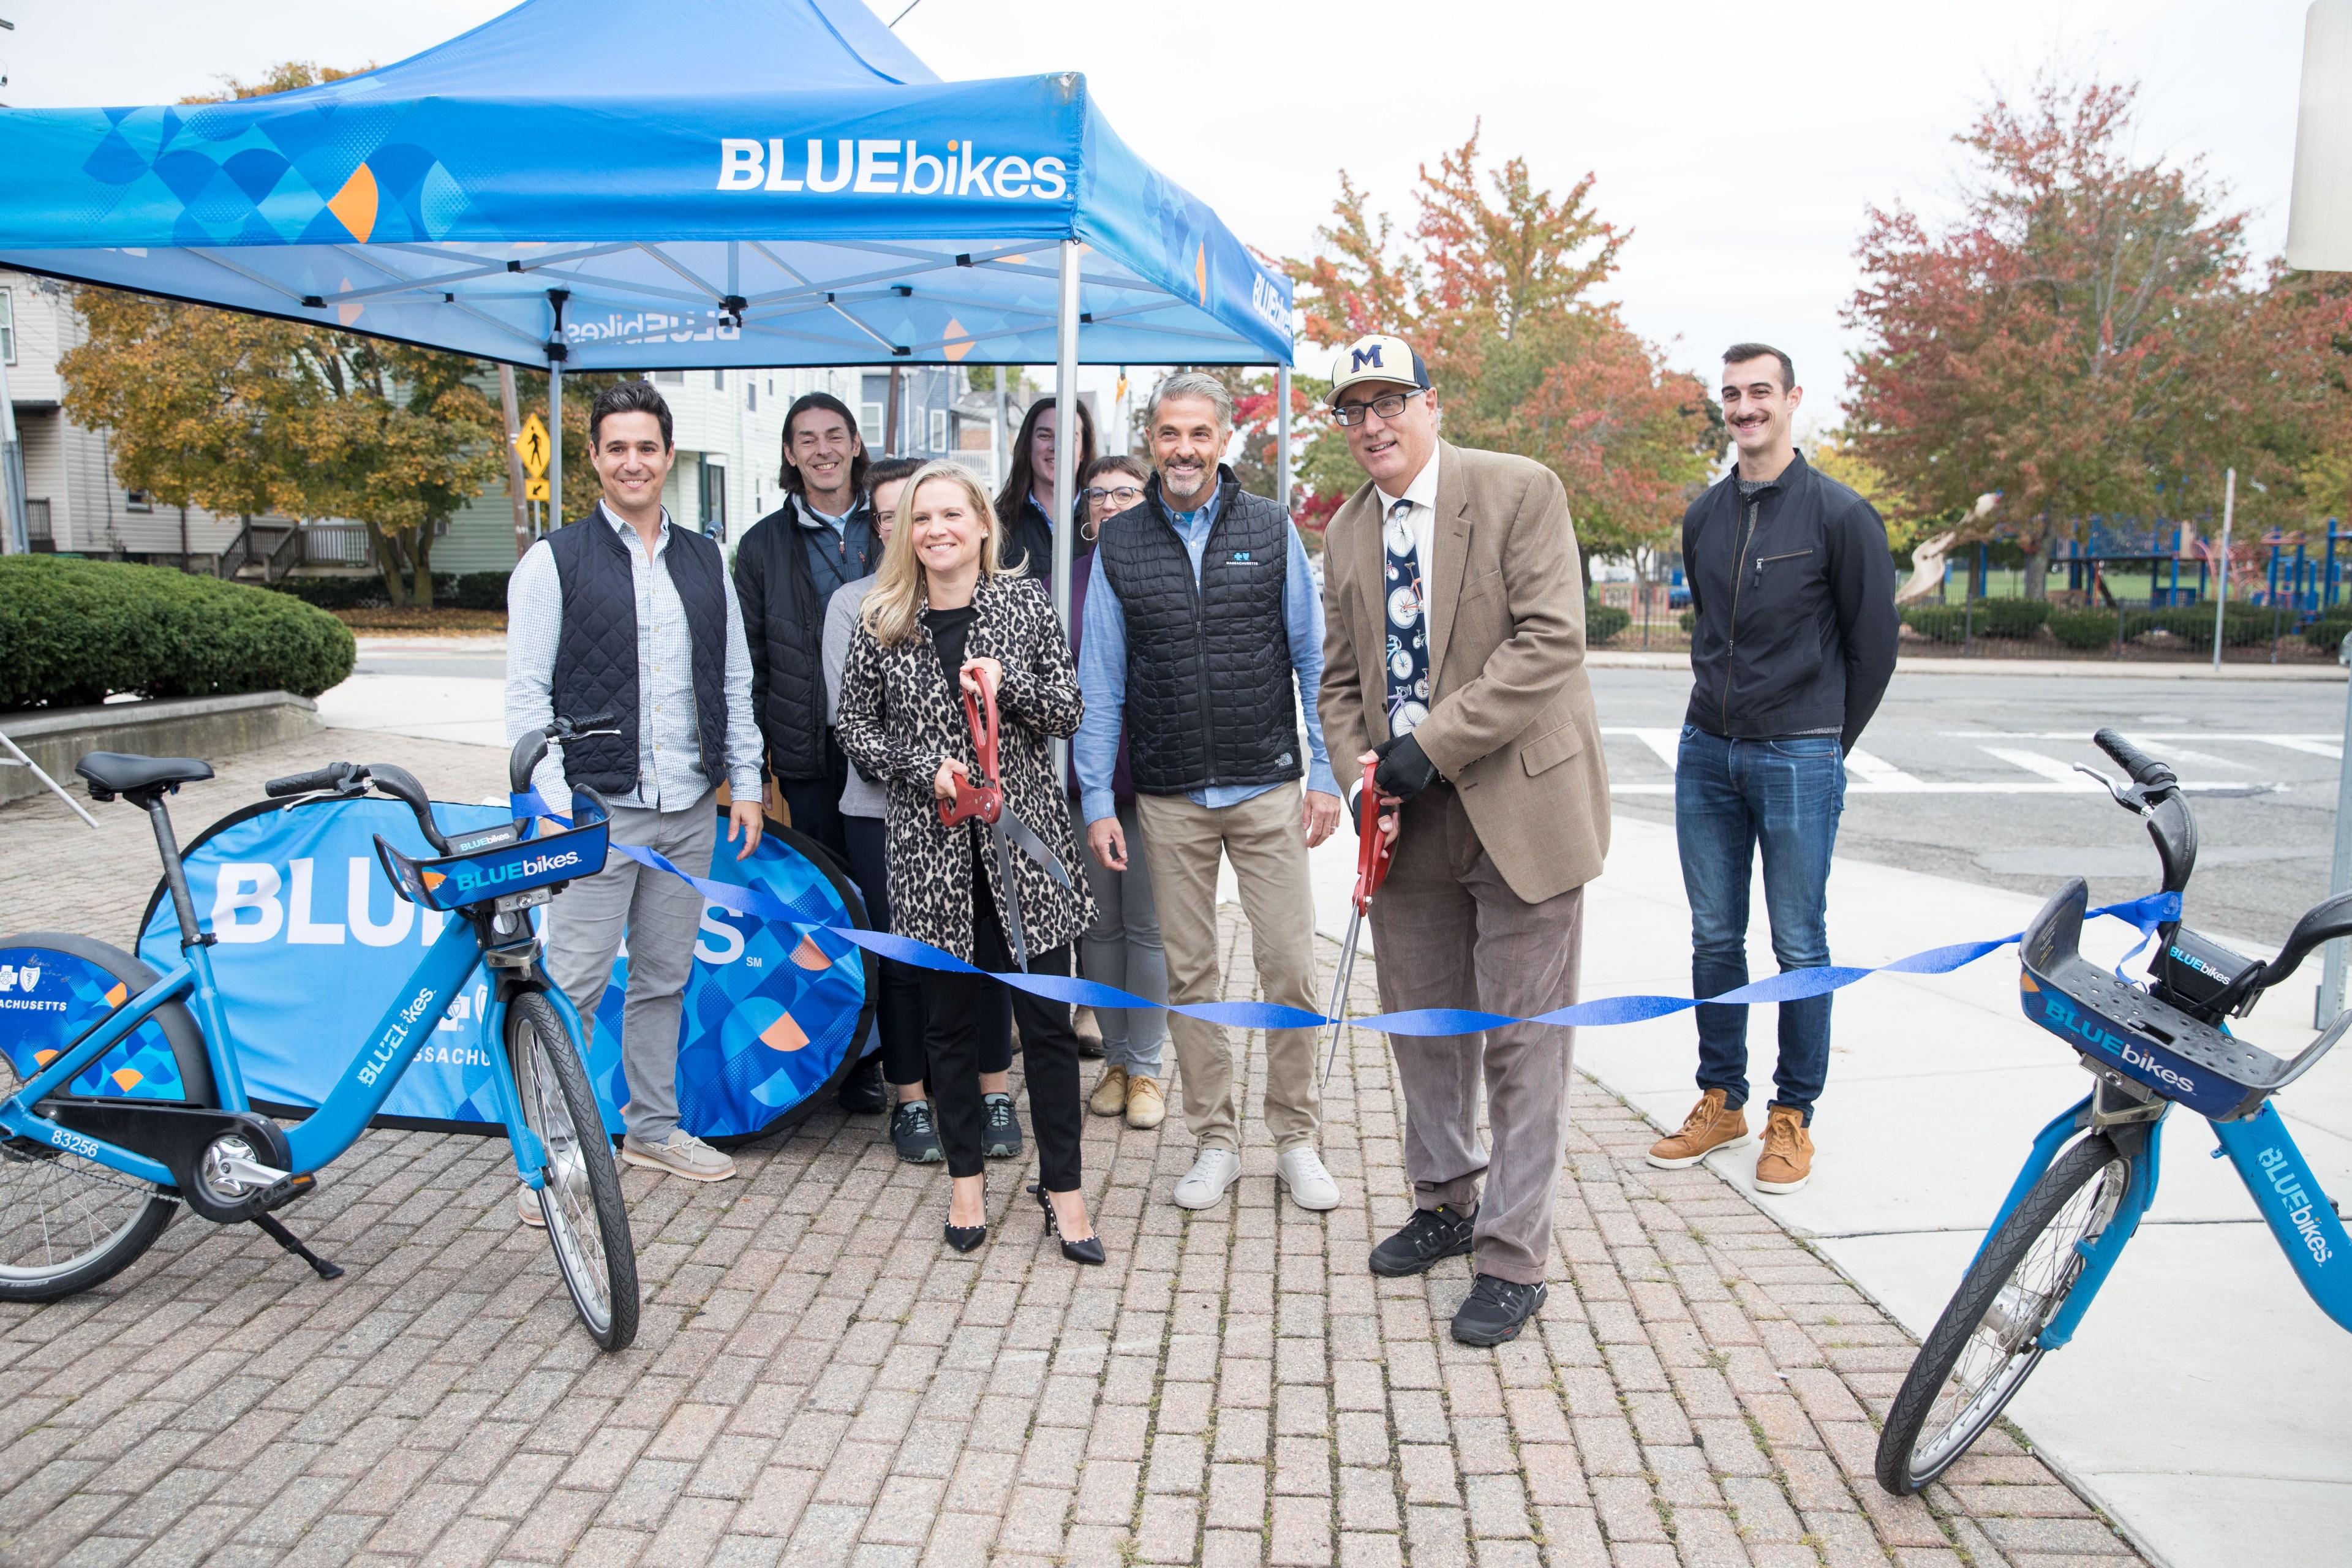 A small crowd gathers under a Bluebikes-branded pop-up tent next to some Bluebikes resting on their kickstands. In the foreground, a man in a suit, ballcap, and bicycle-print tie and woman in a leapord-print jacket hold comically oversized shears as they cut a ribbon while the others look on.